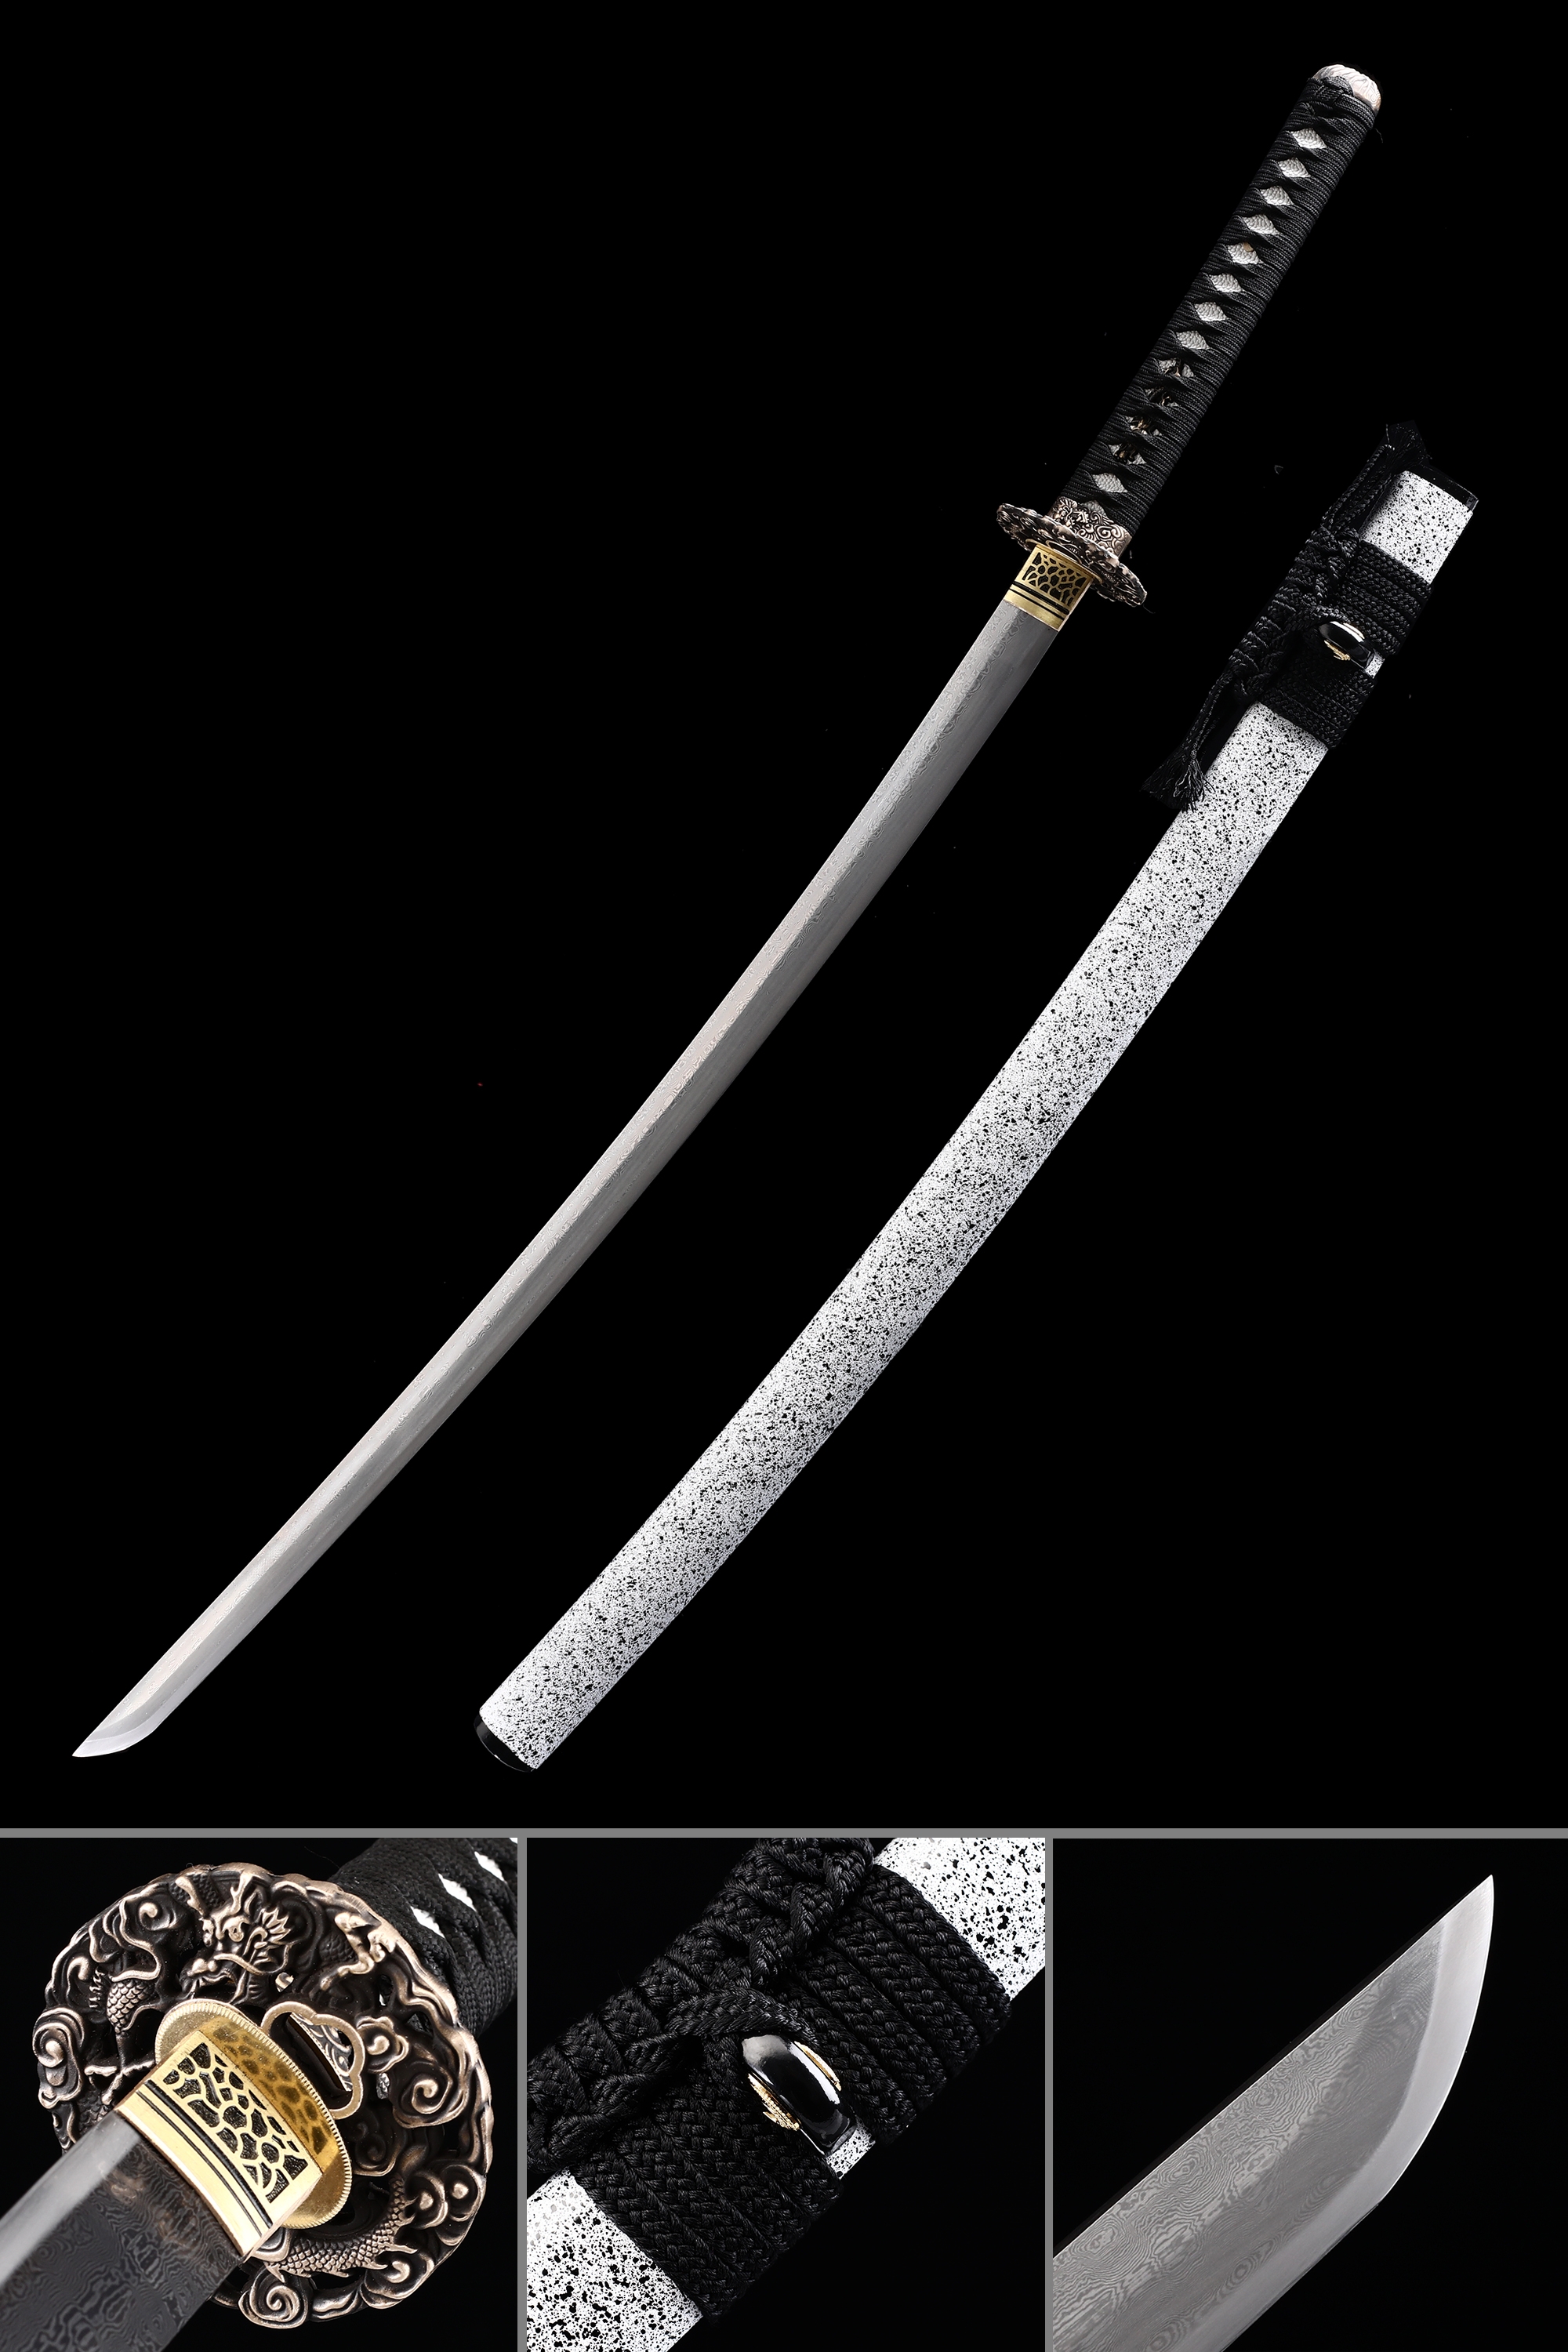 Authentic Japanese Katana Sword 1000 Layer Folded Steel With White Scabbard